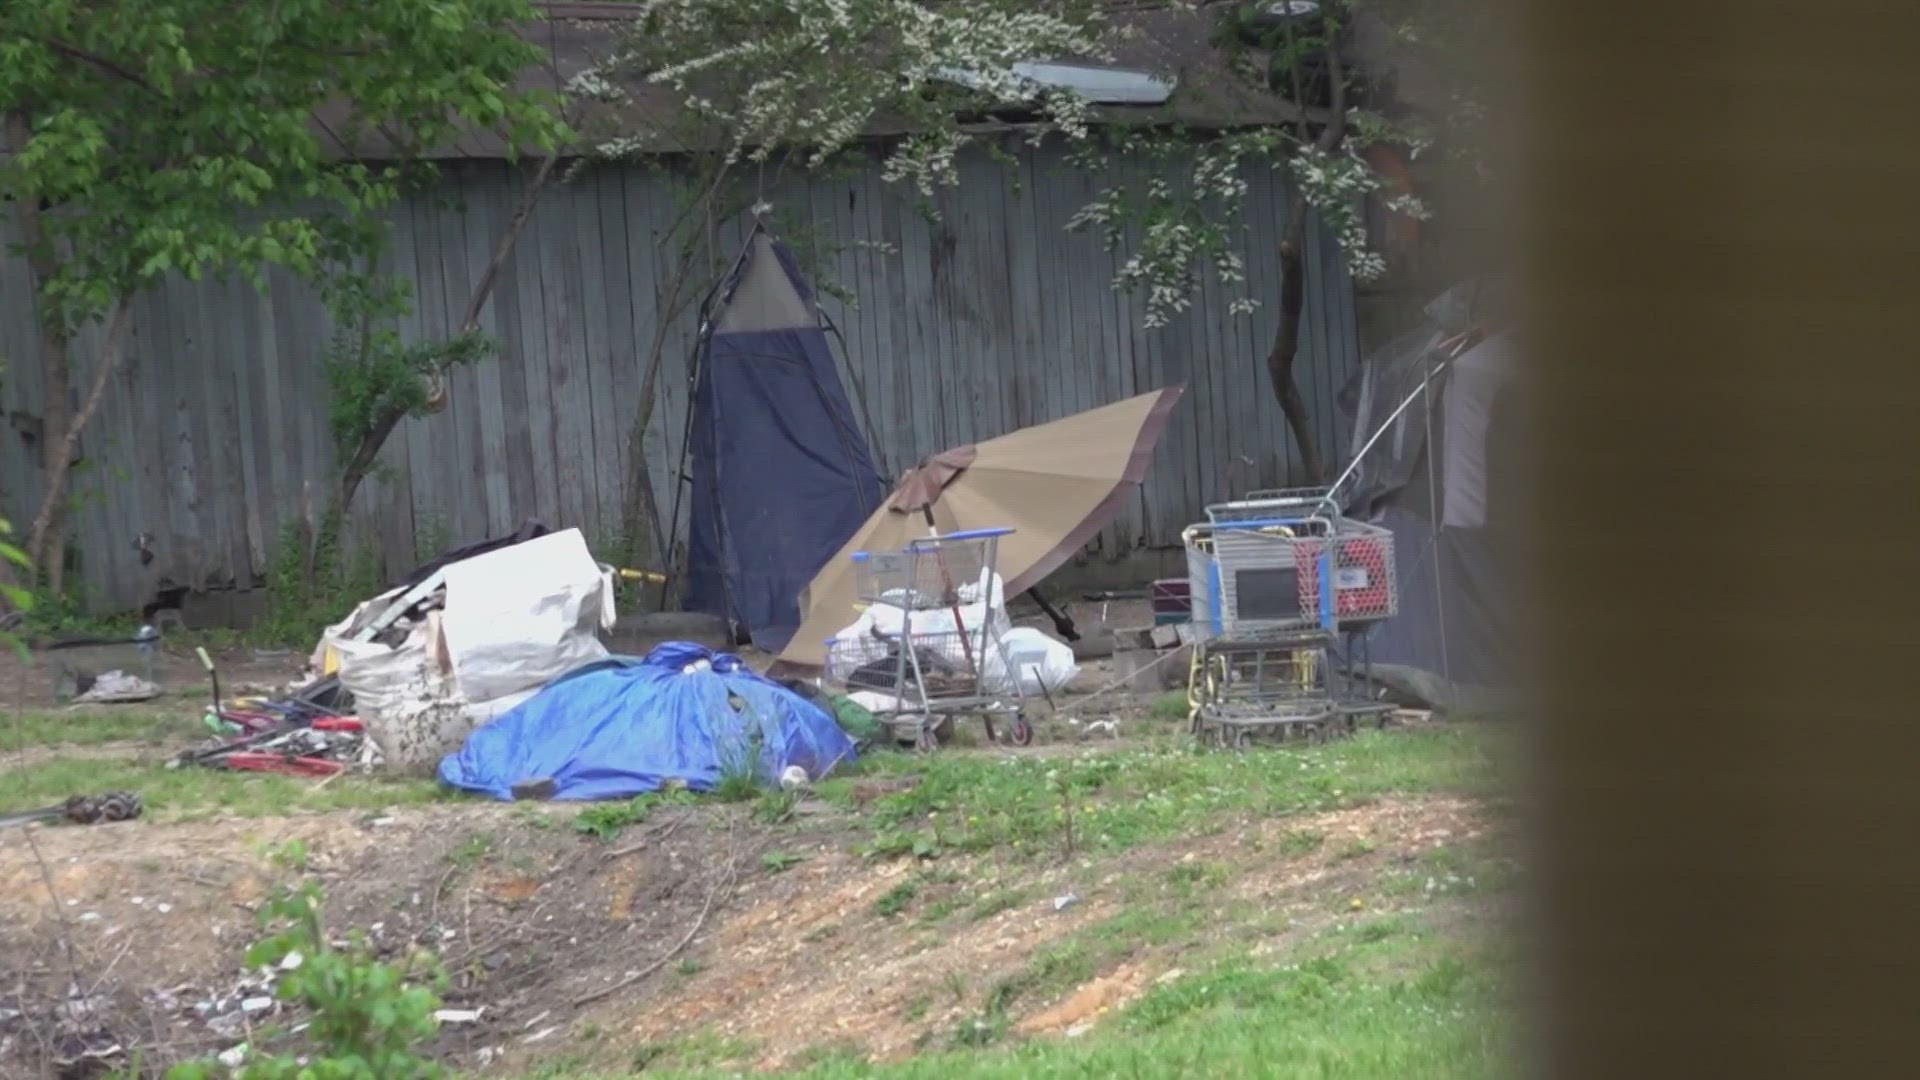 Neighbors in the Harris Road area said warming fires, overdoses and tents are becoming common sights as homelessness grows.